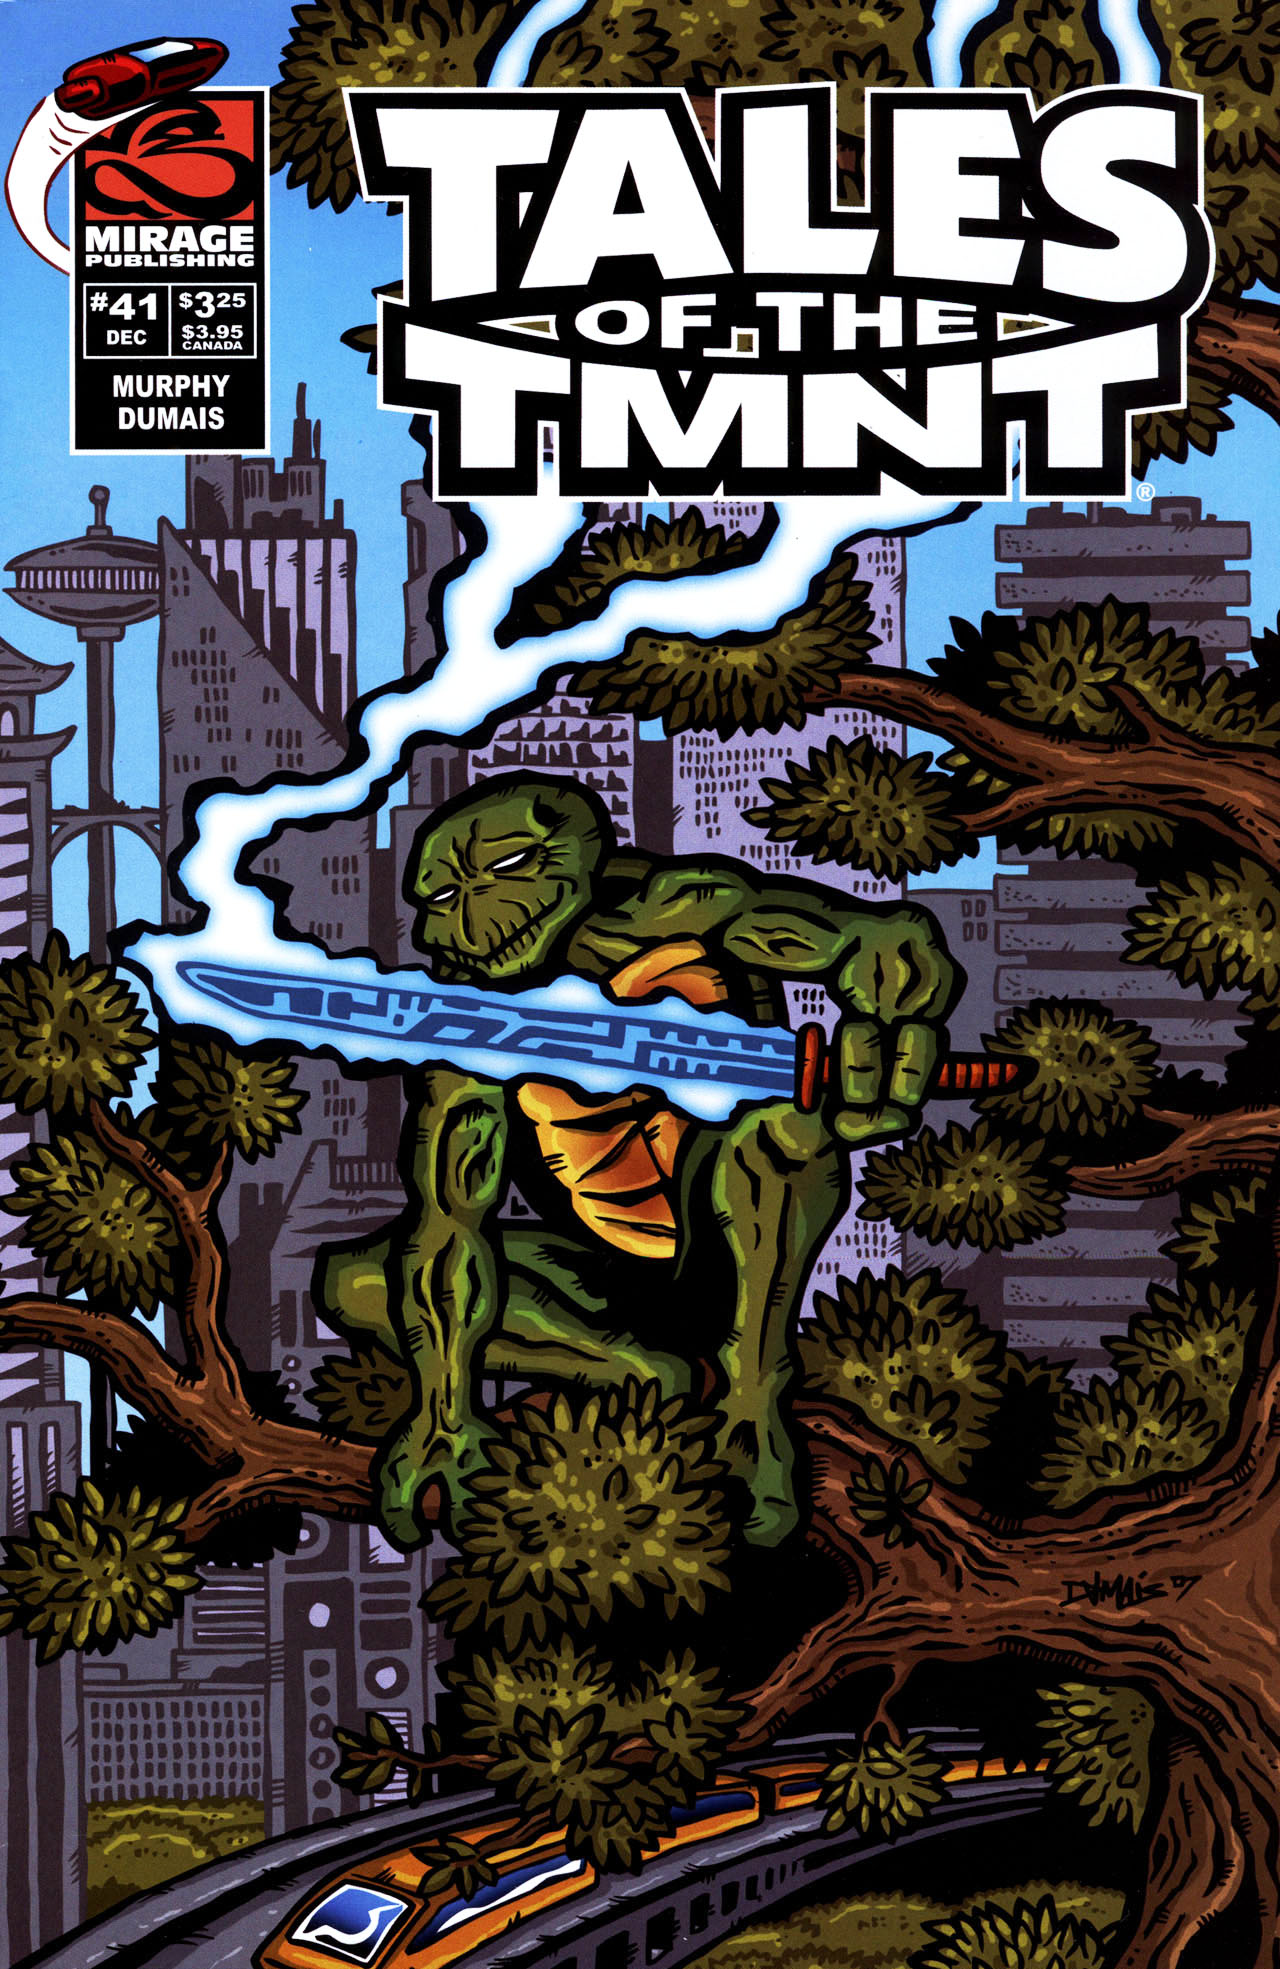 Read online Tales of the TMNT comic -  Issue #41 - 2